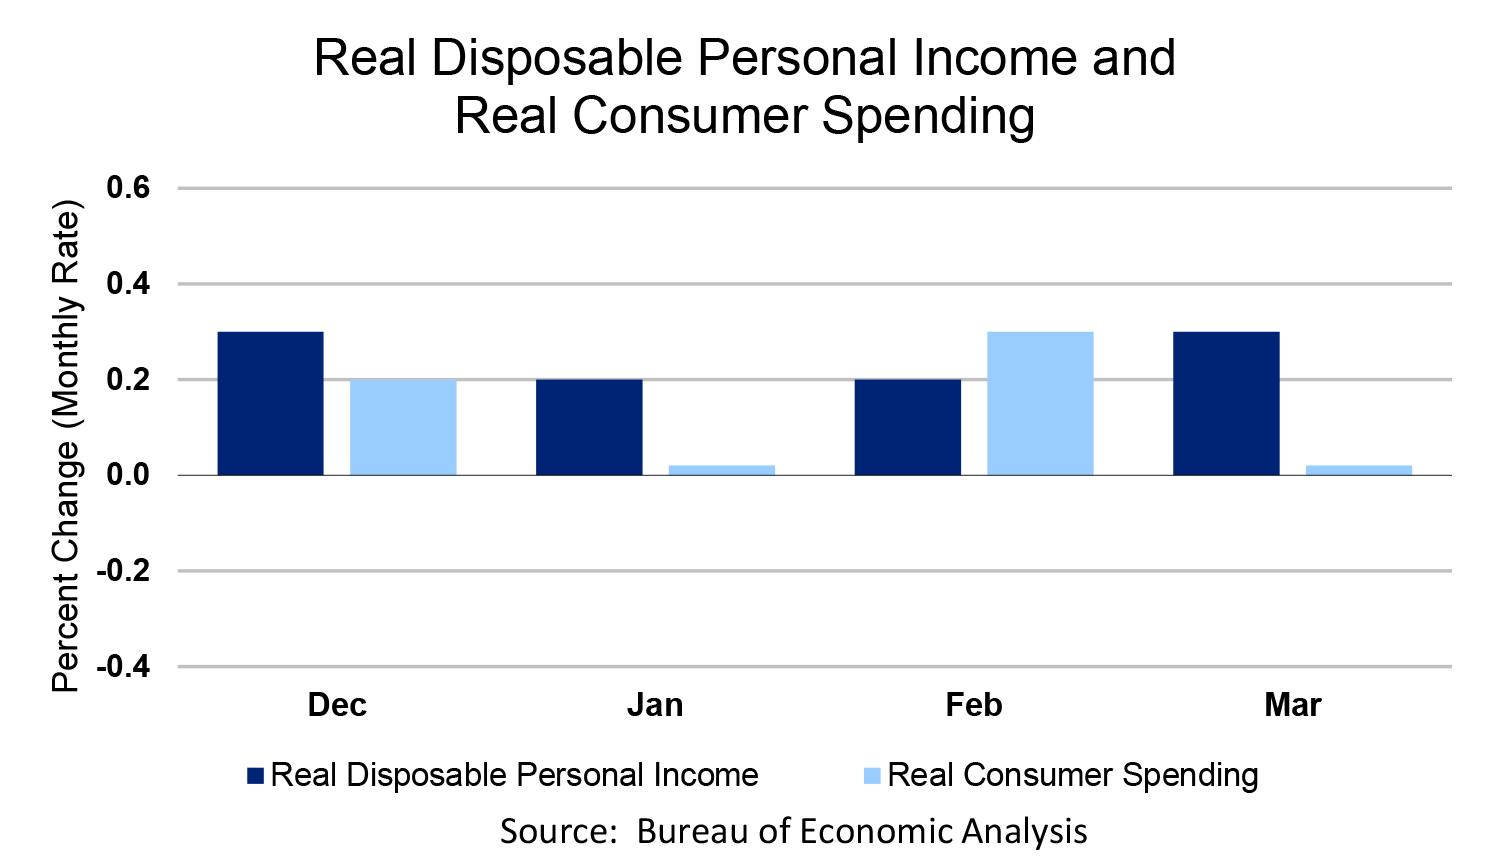 Real Disposable Personal Income and Real Consumer Spending